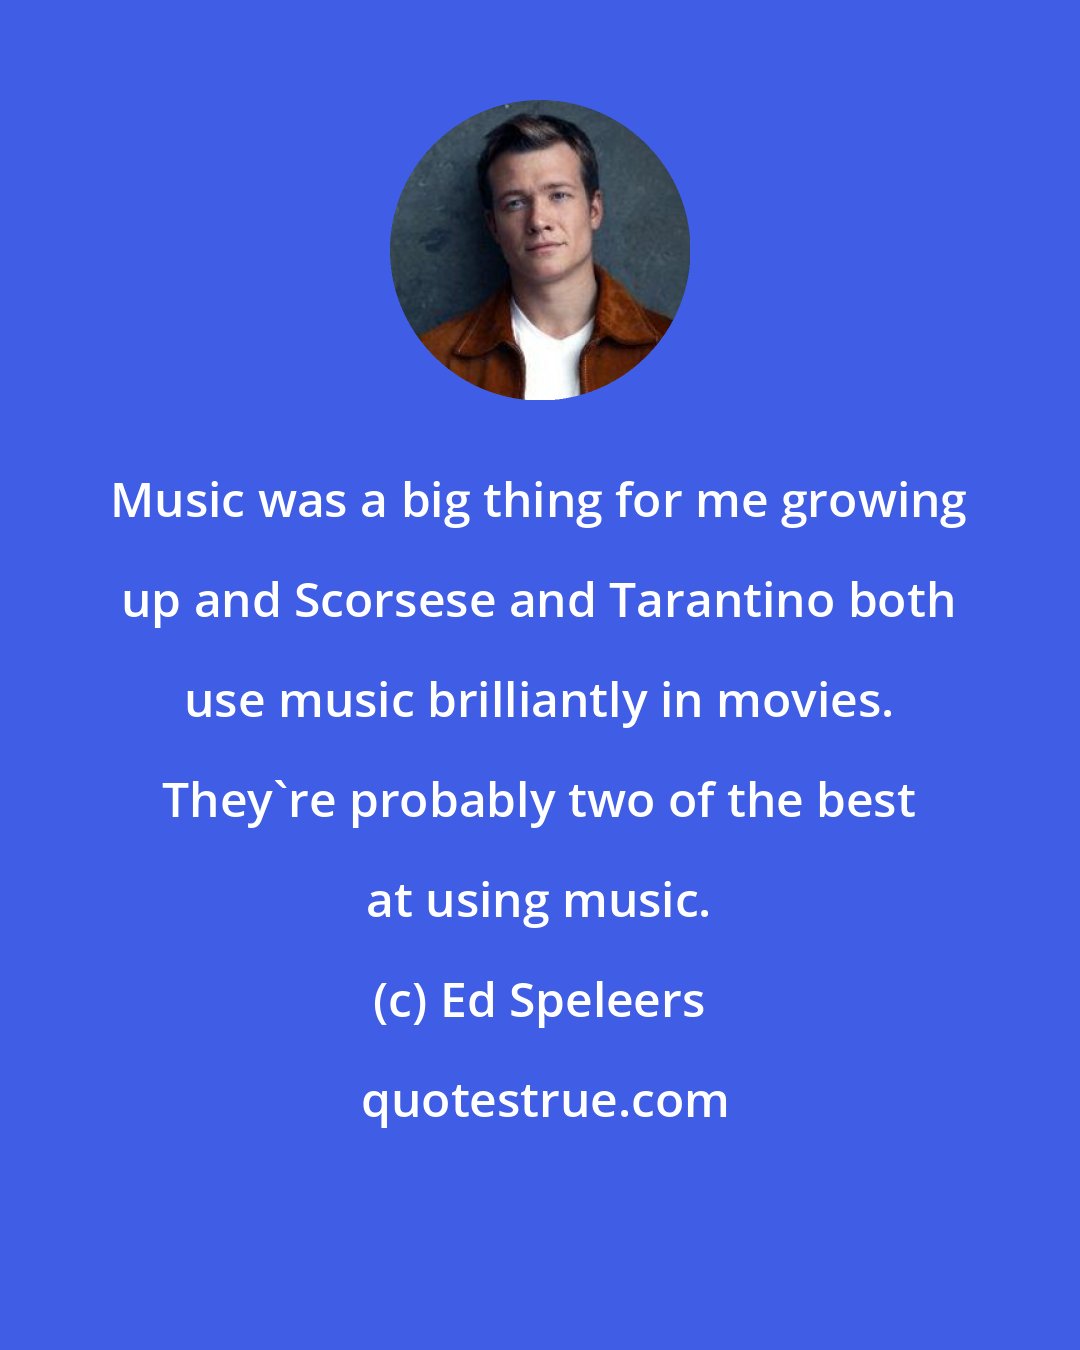 Ed Speleers: Music was a big thing for me growing up and Scorsese and Tarantino both use music brilliantly in movies. They're probably two of the best at using music.